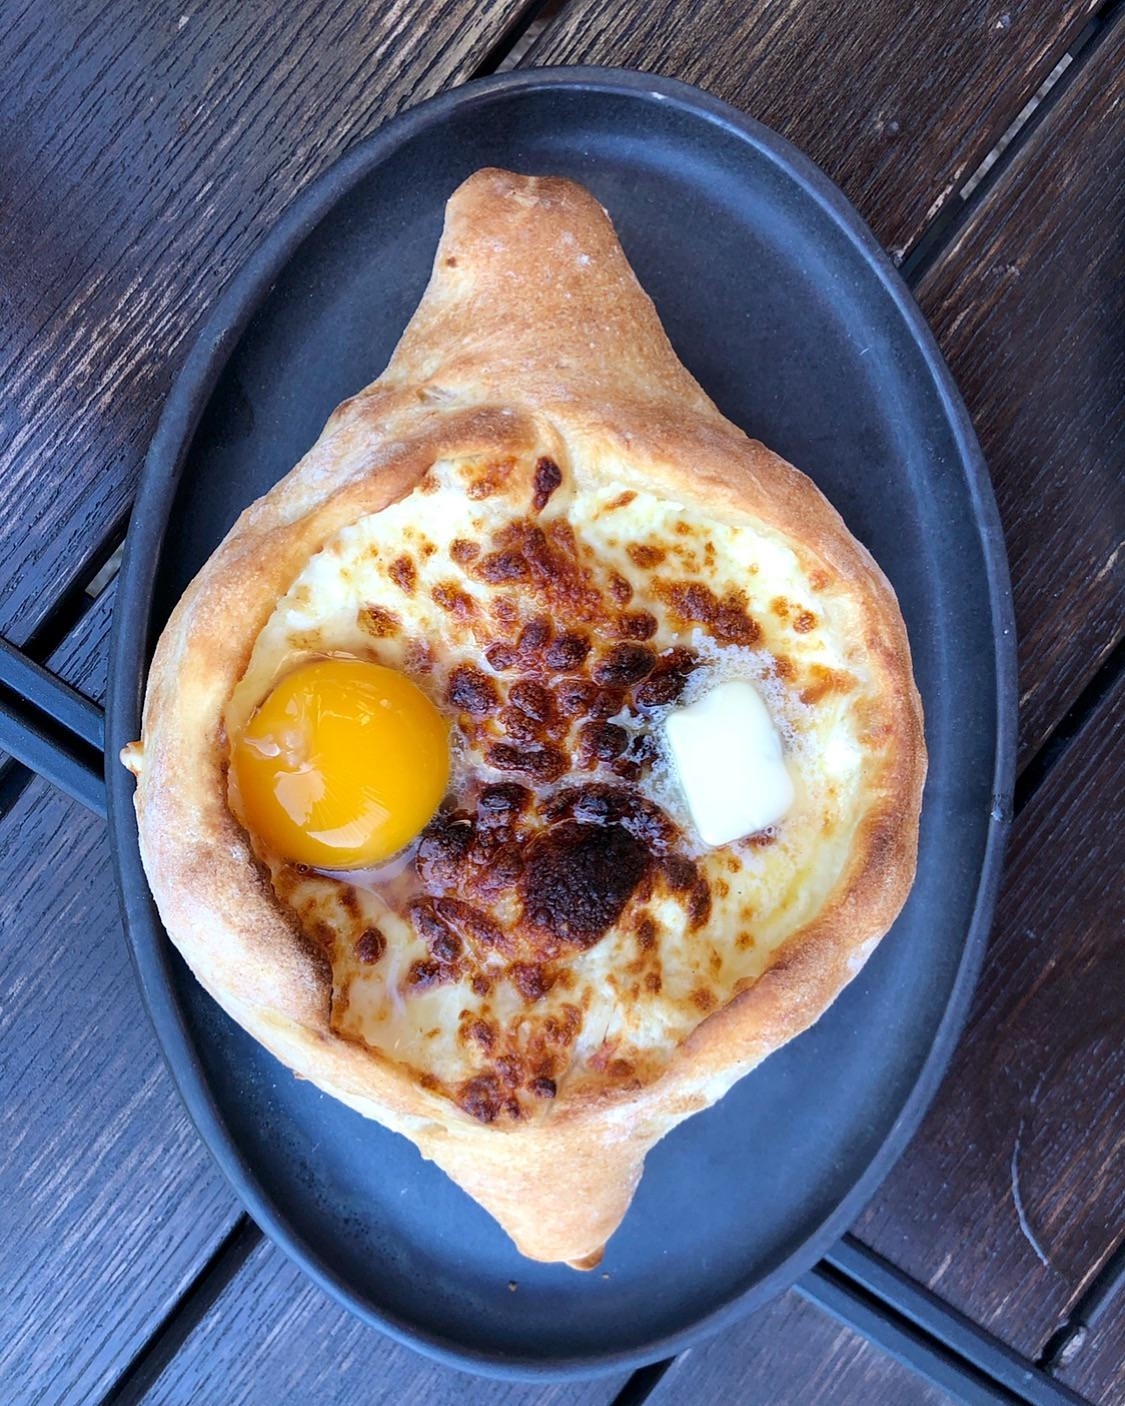 Georgian cheese bread, khachapuri, with an egg in the center and a pat of butter on top, served on a black plate